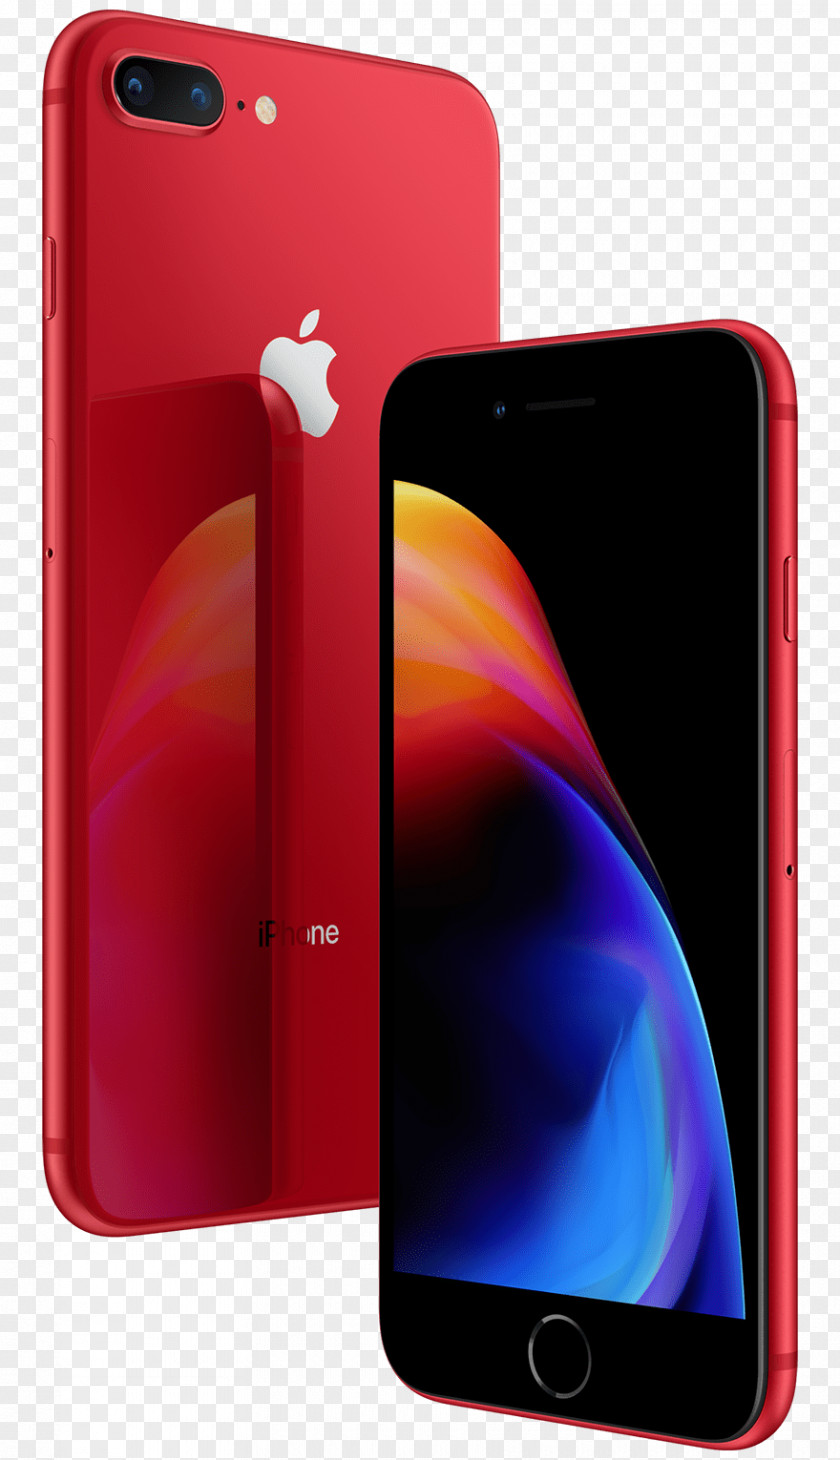 Ipad IPhone 7 Product Red IPad Apple Smartphone PNG